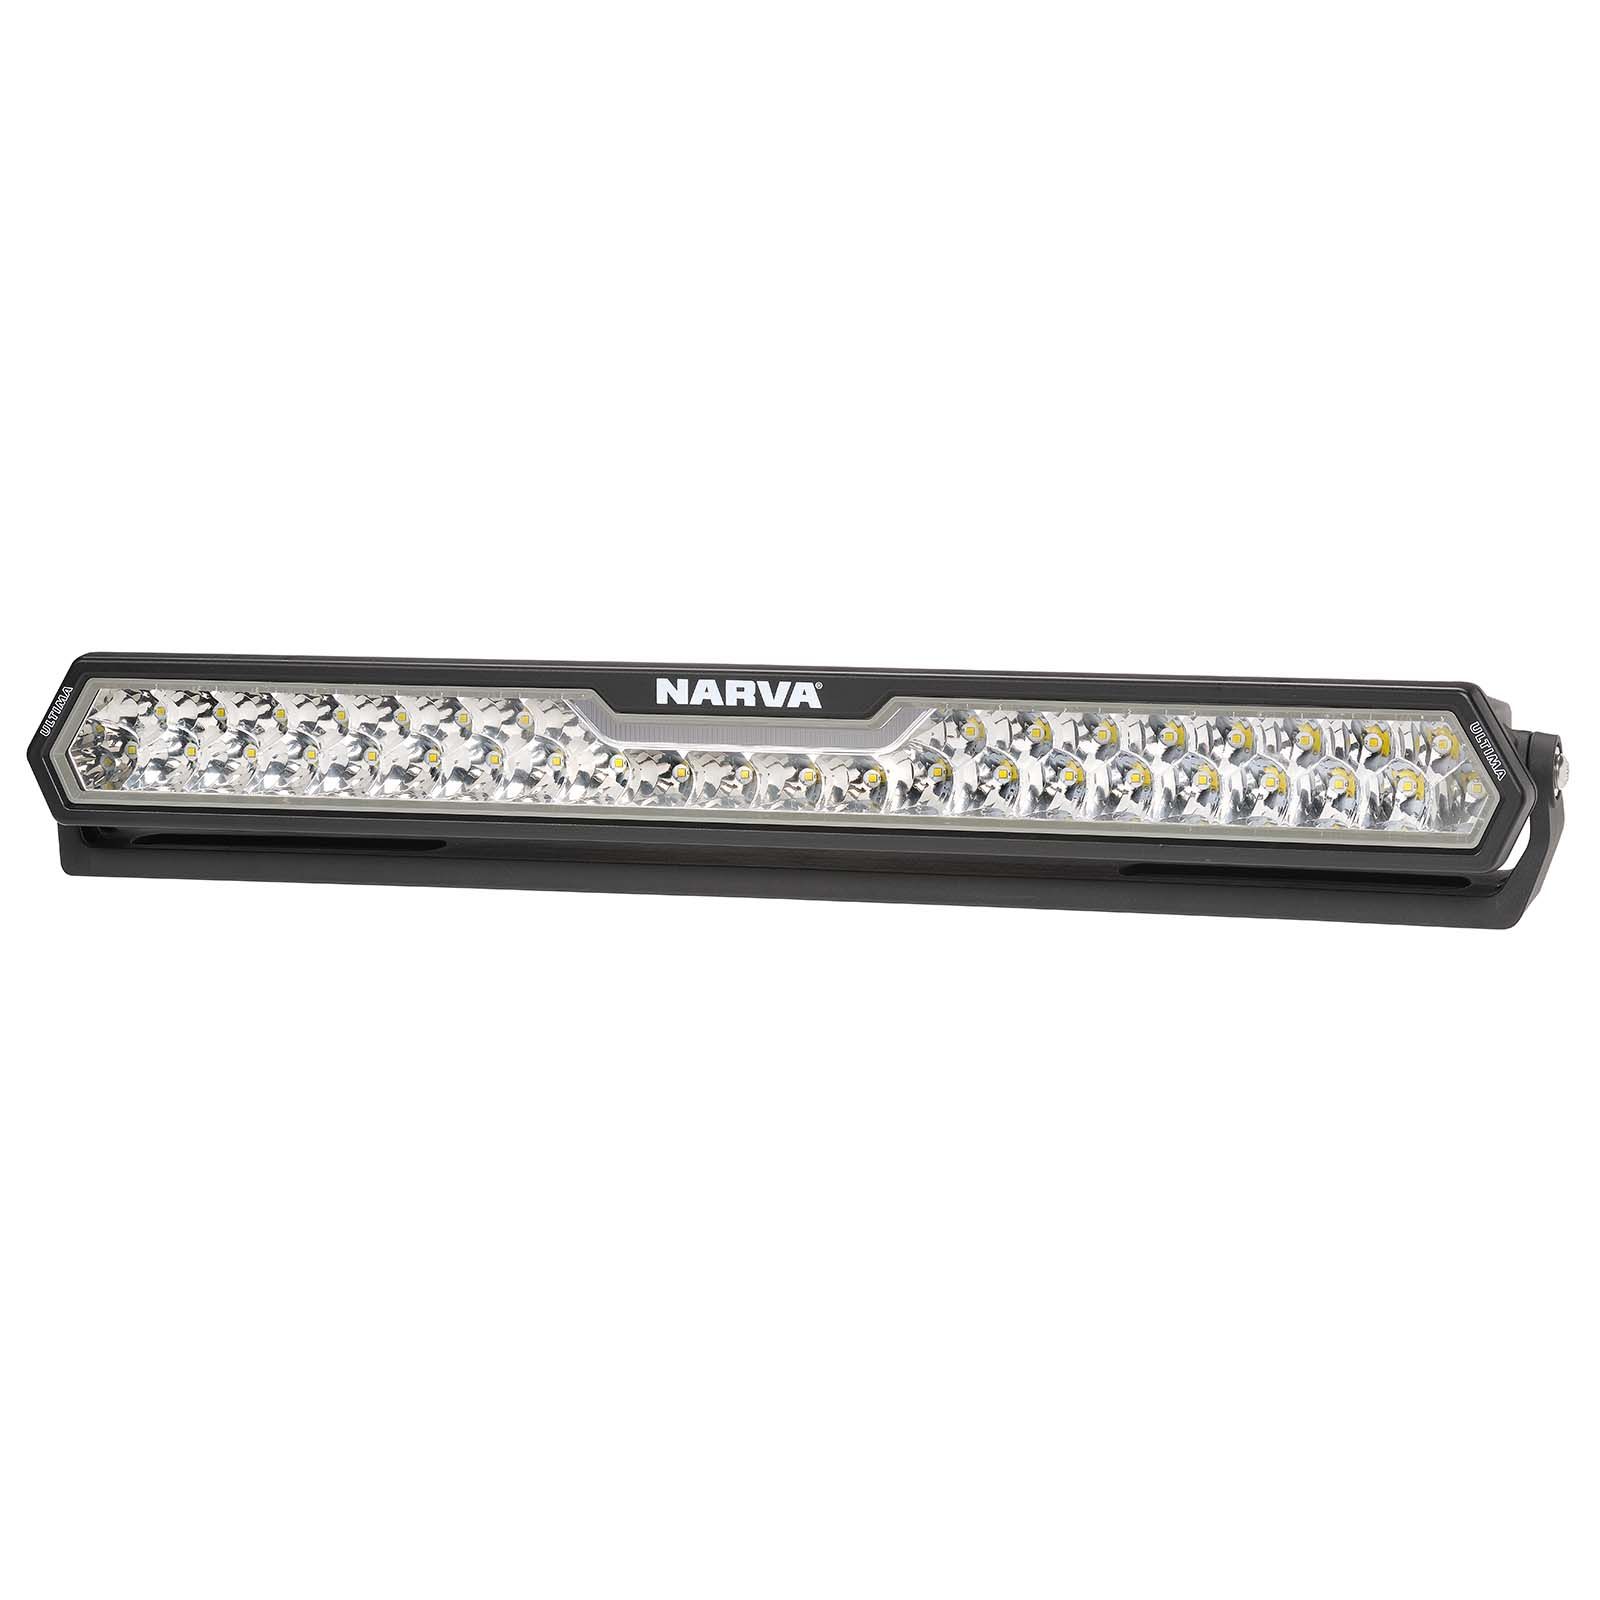 NARVA Ultima LED Light Bars (Updated video available) 